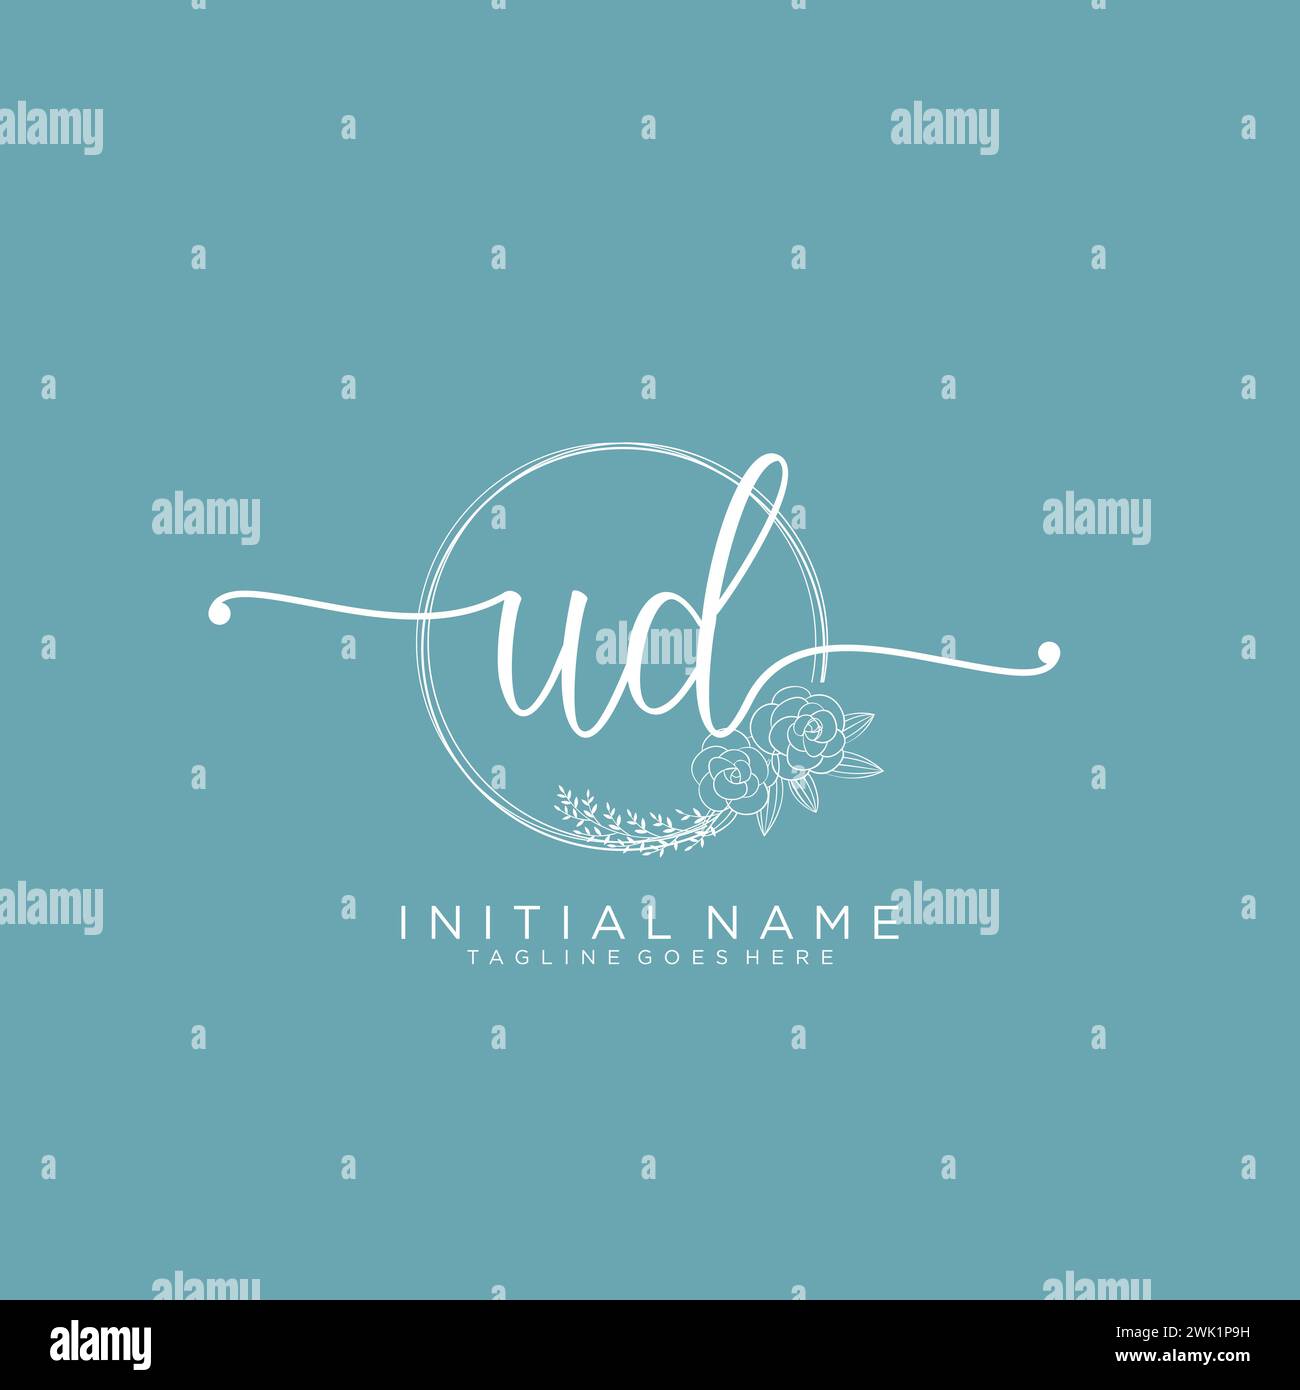 UD Initial handwriting logo with circle Stock Vector